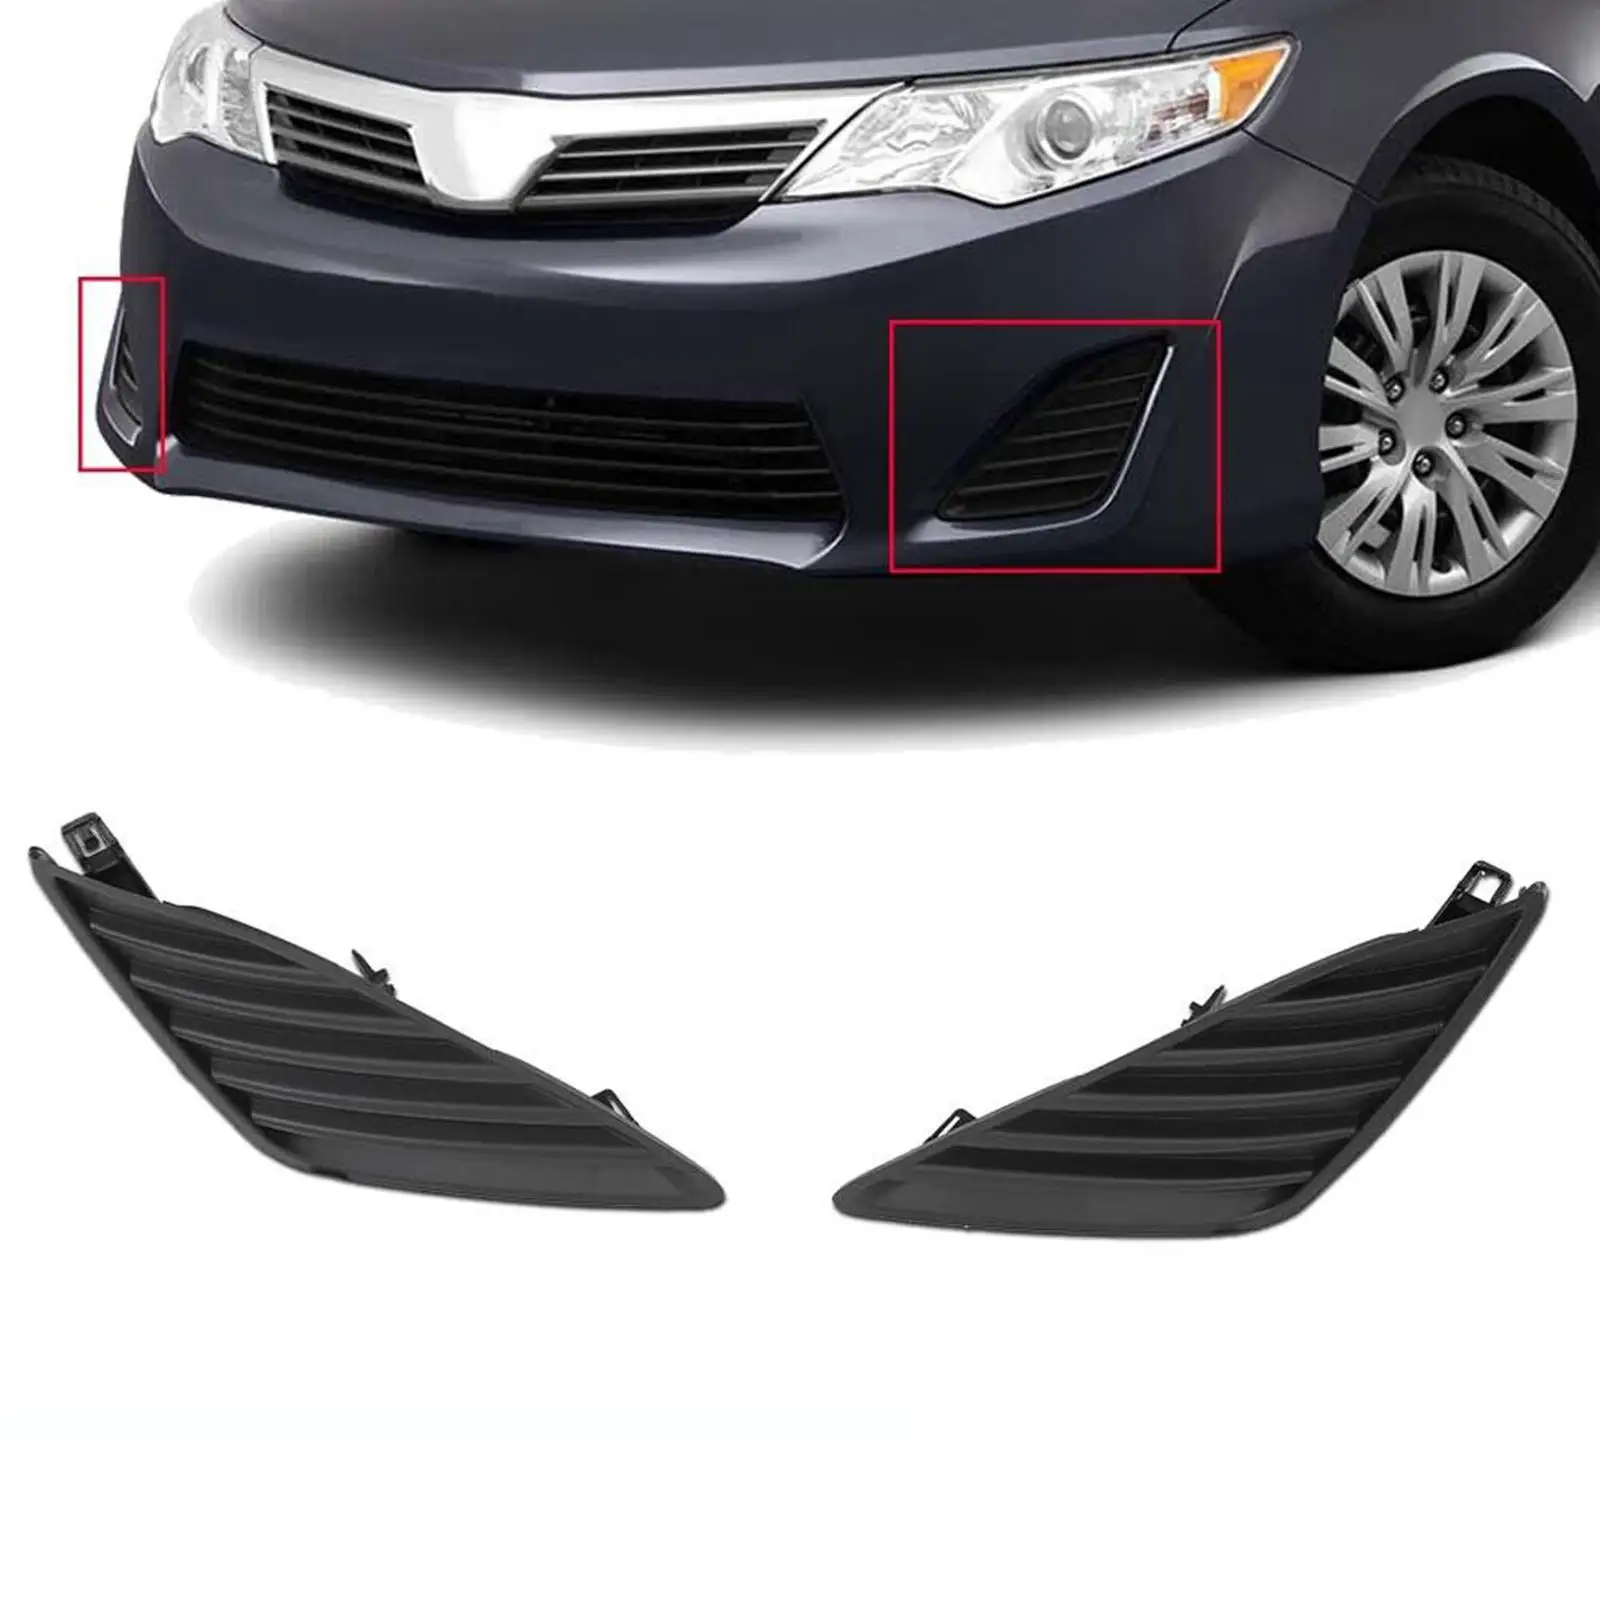 Vehicle Fog Light Cover Cap 5212806260 Auto for Toyota for Camry 2012-2014